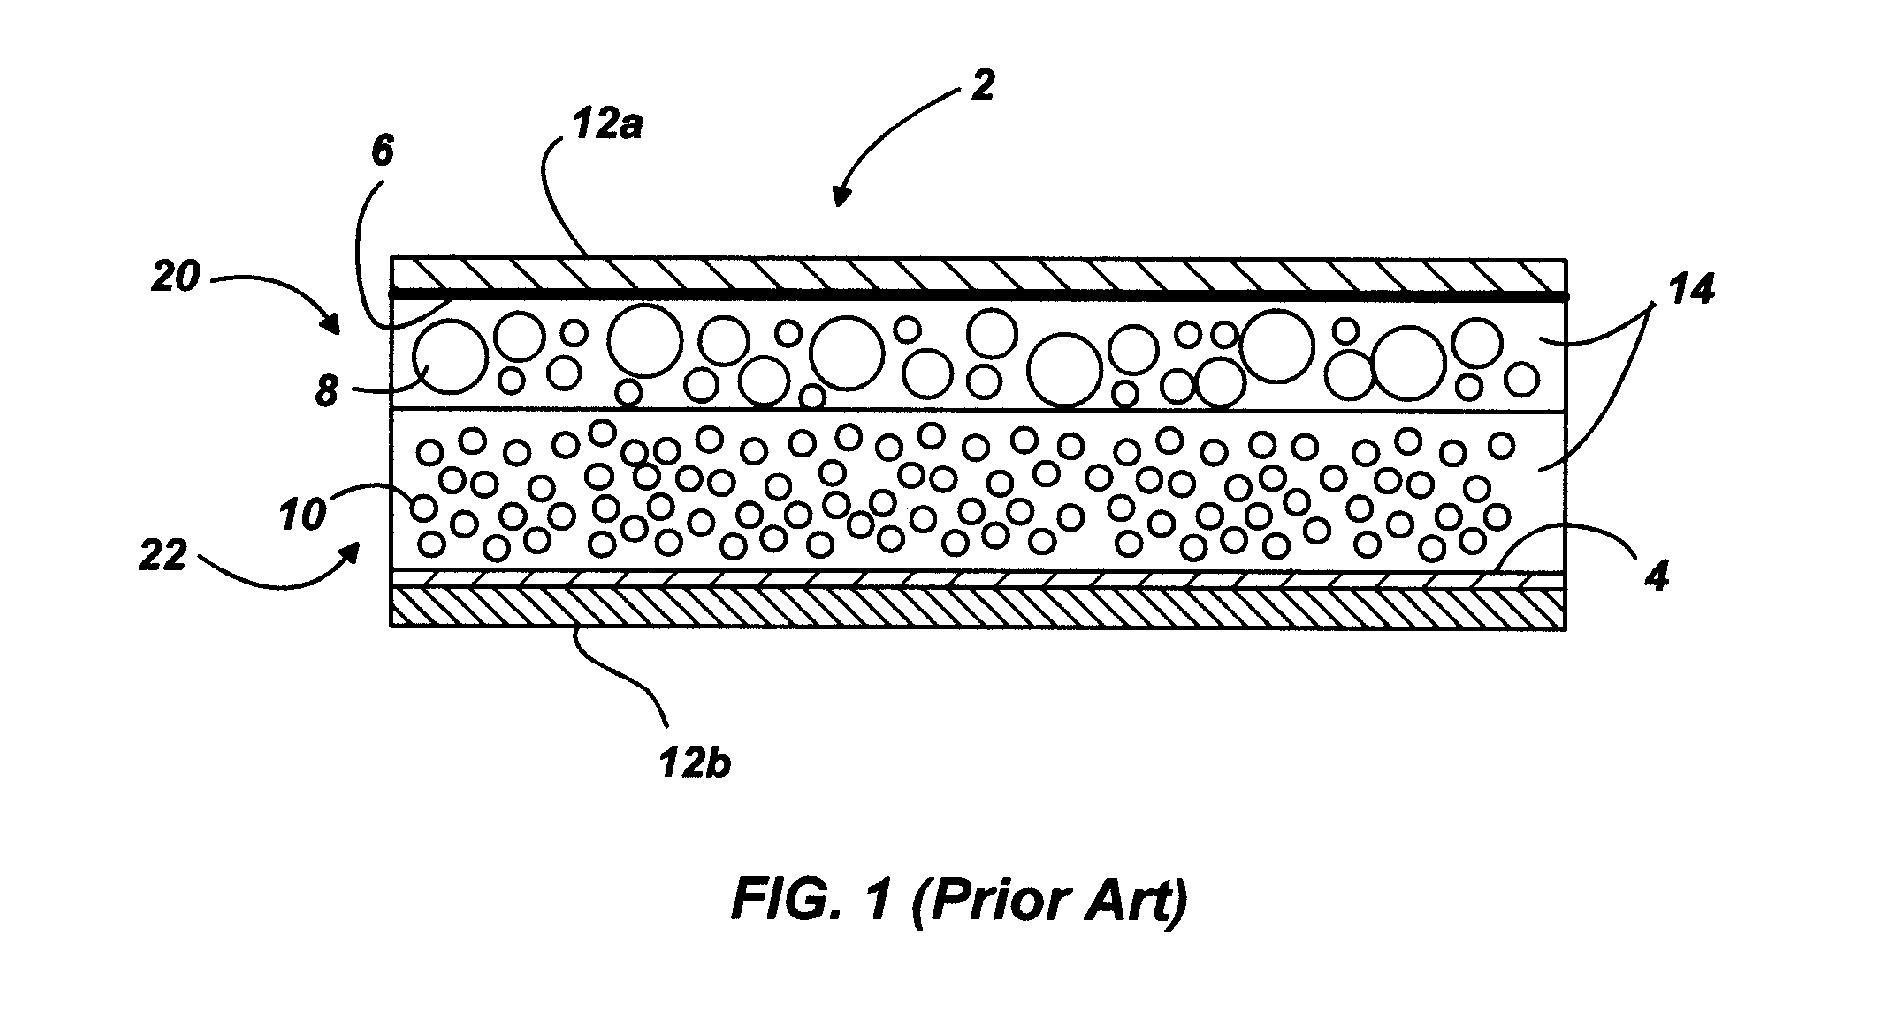 Moisture-resistant electroluminescent phosphor with high initial brightness and method of making